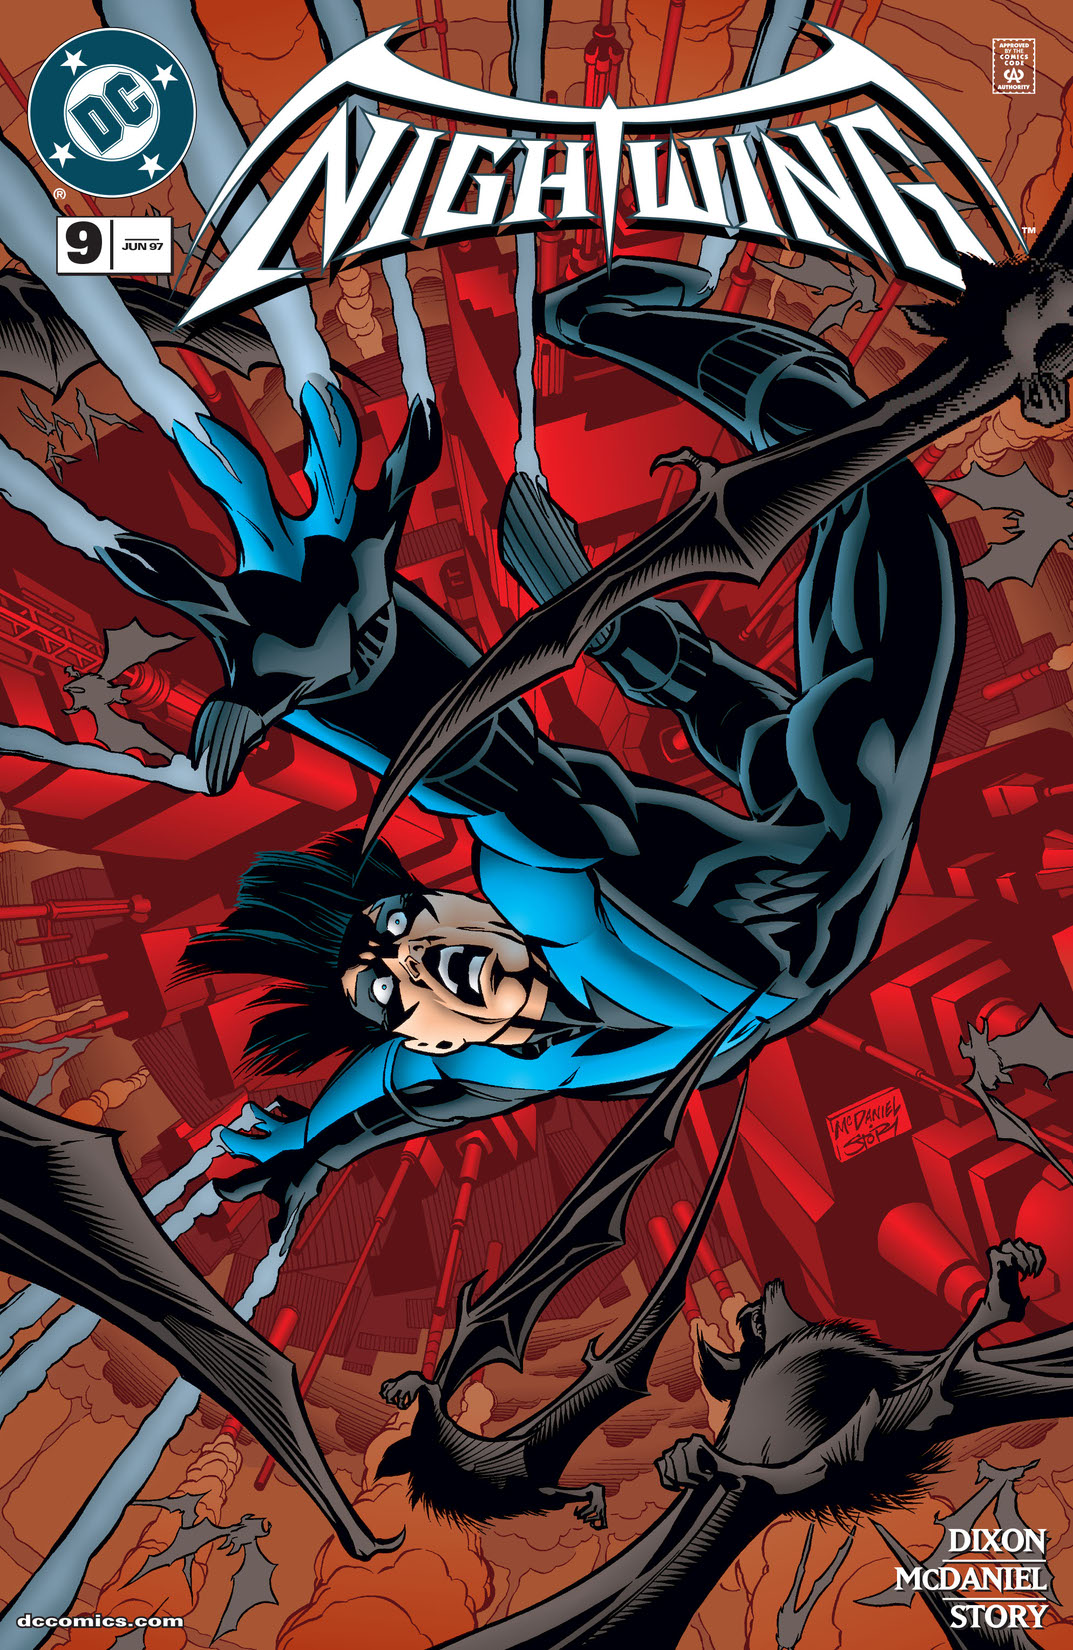 Nightwing (1996-) #9 preview images